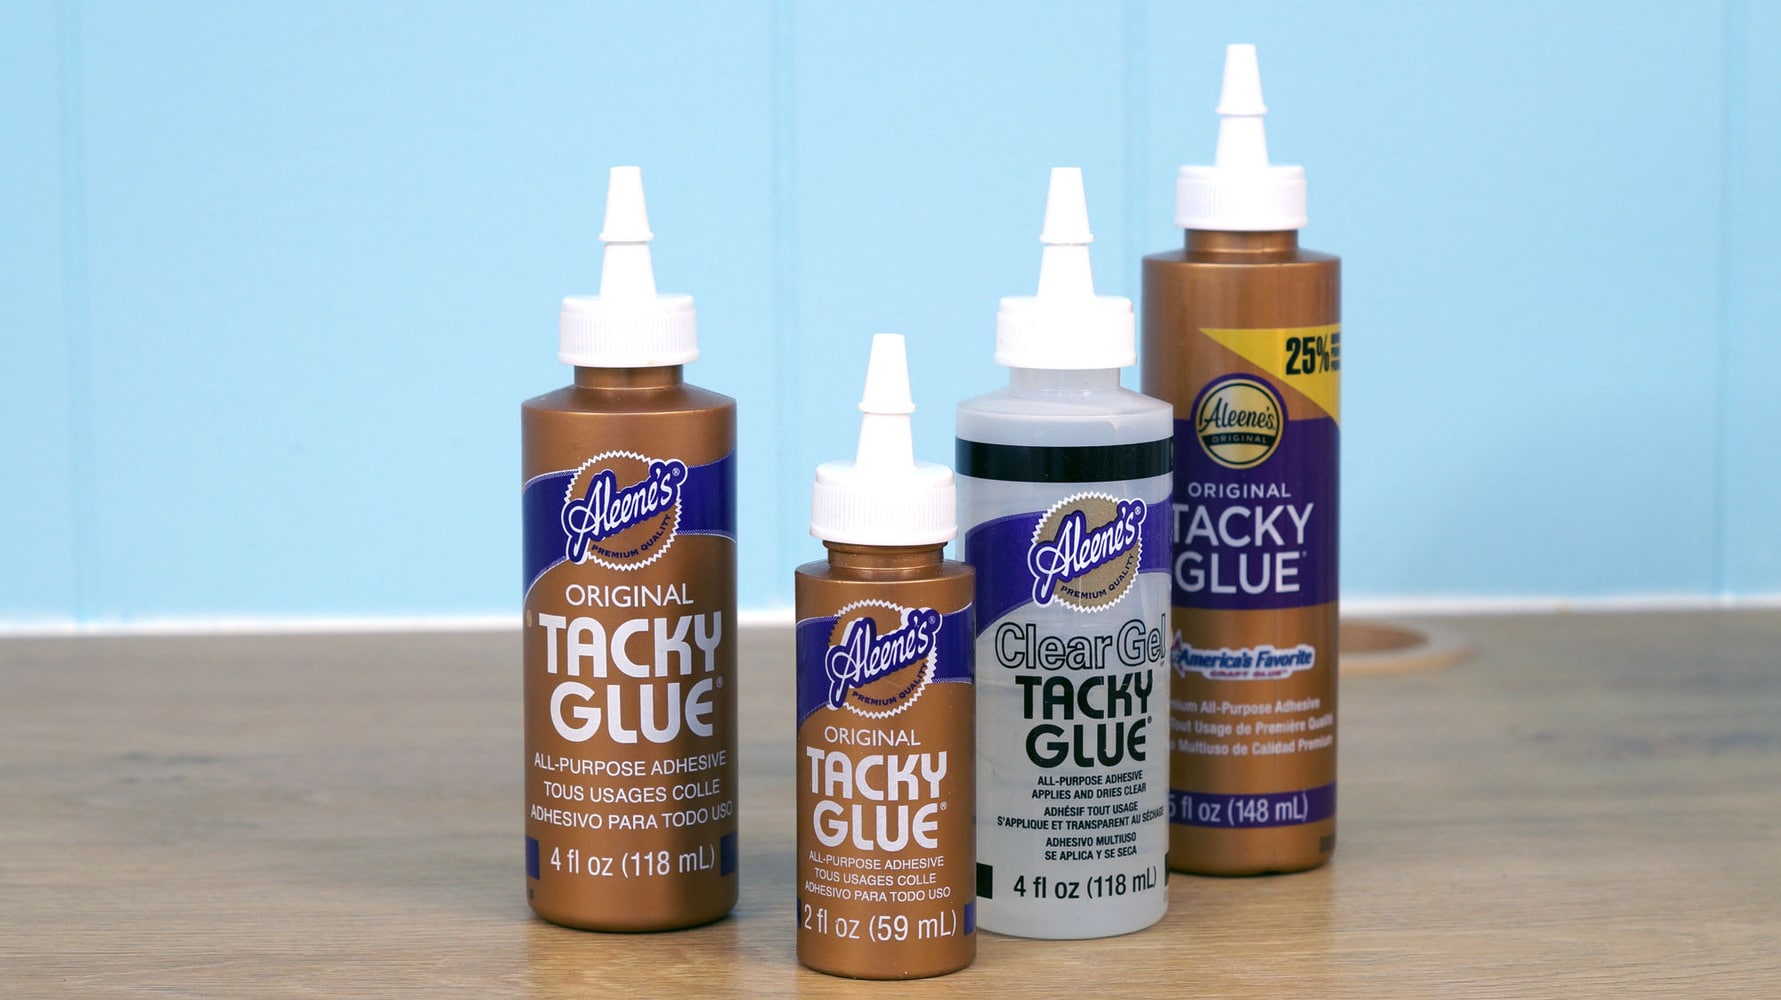 What Glue Will Do? –